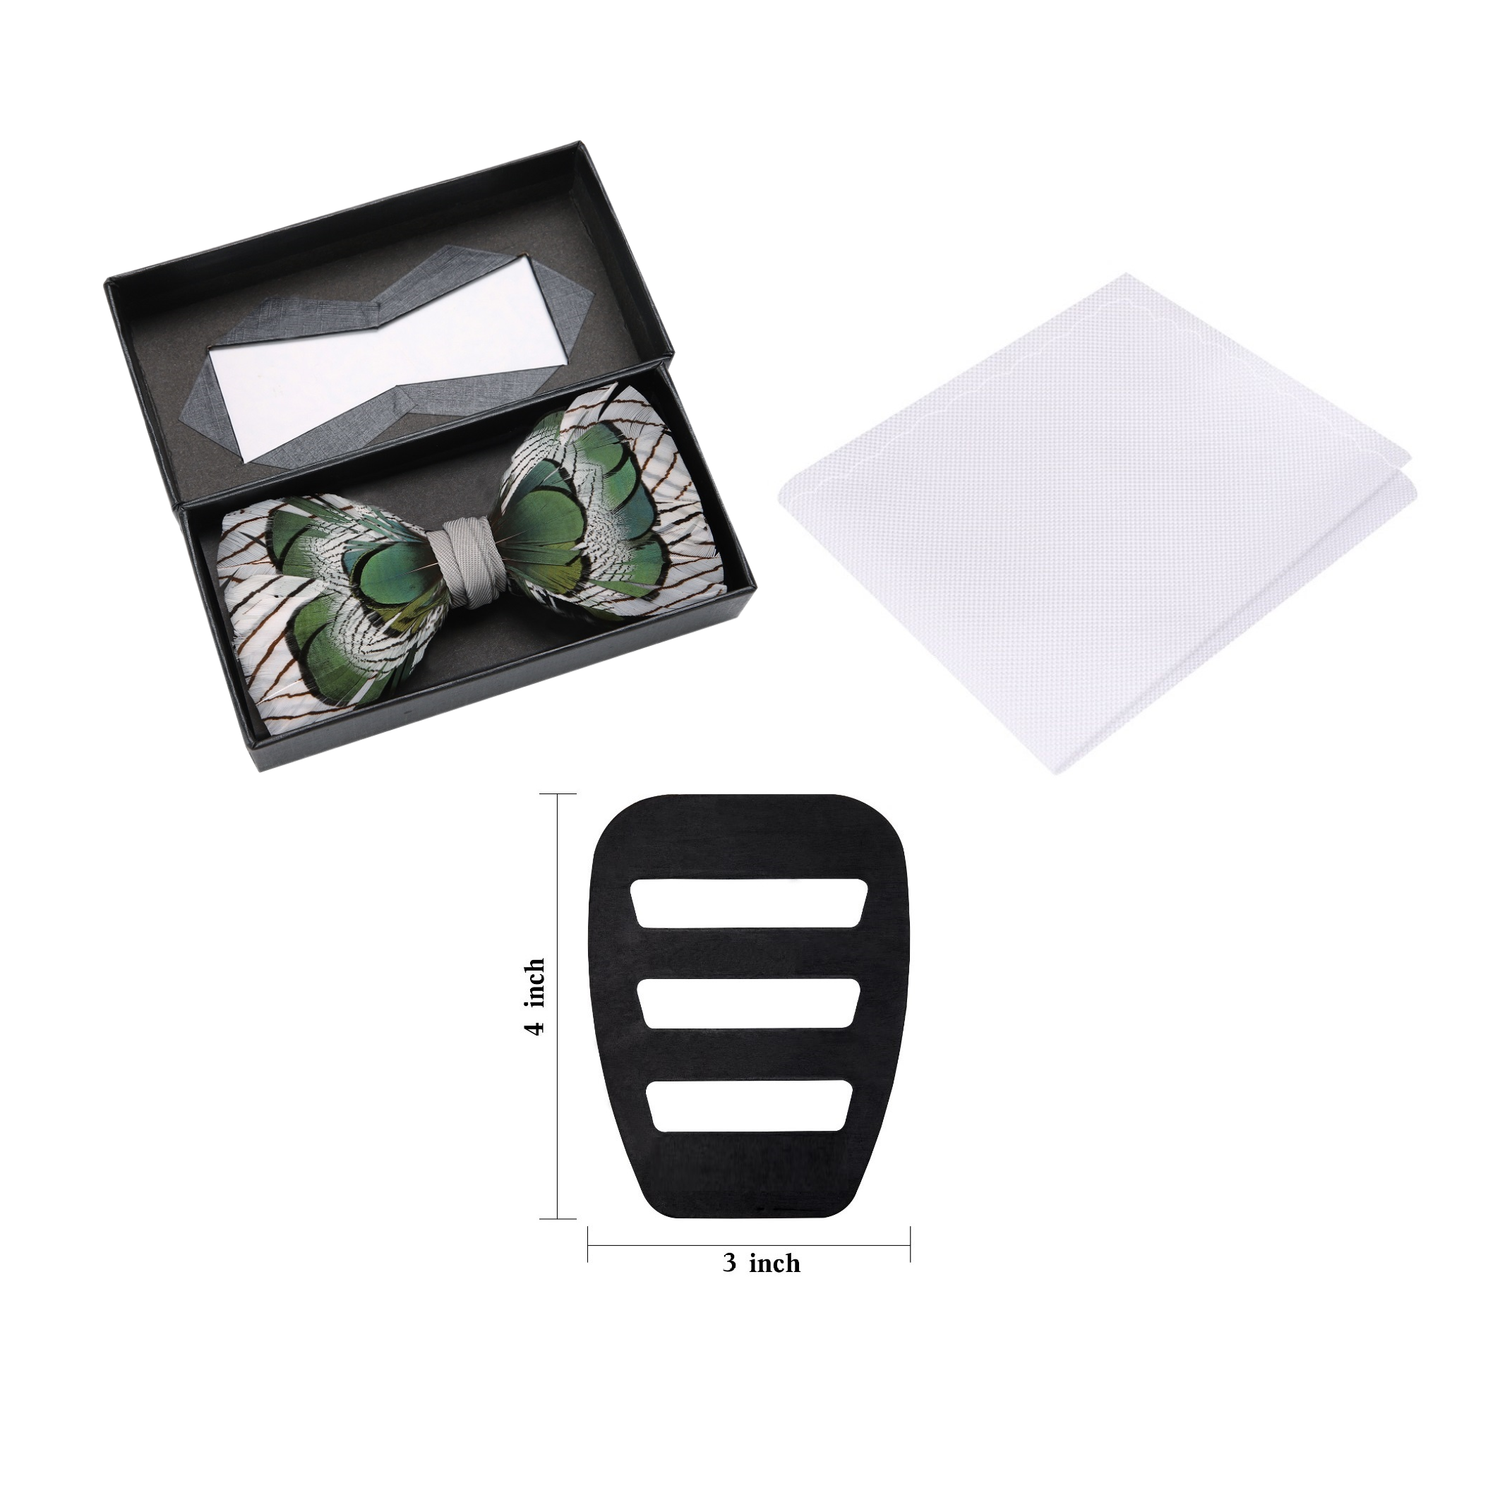 Green, White Feather Pre Tied Bow Tie, White Square and Pocket Square Holder